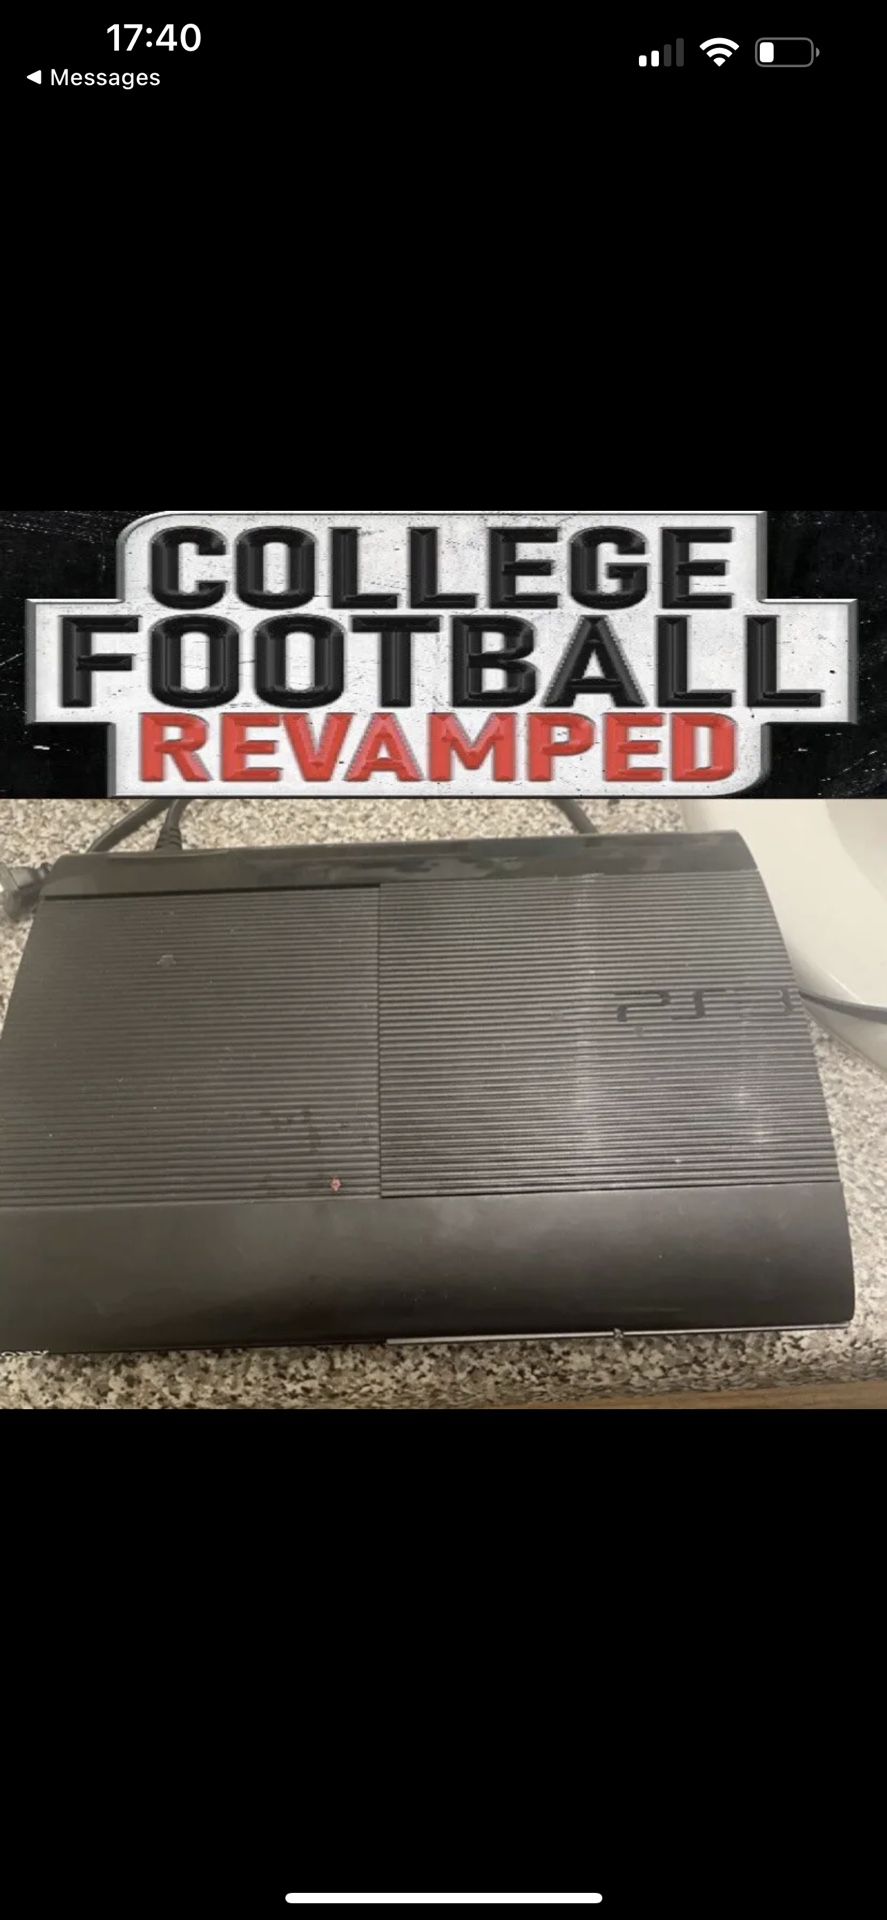 PS3 with ncaa14 college football revamped